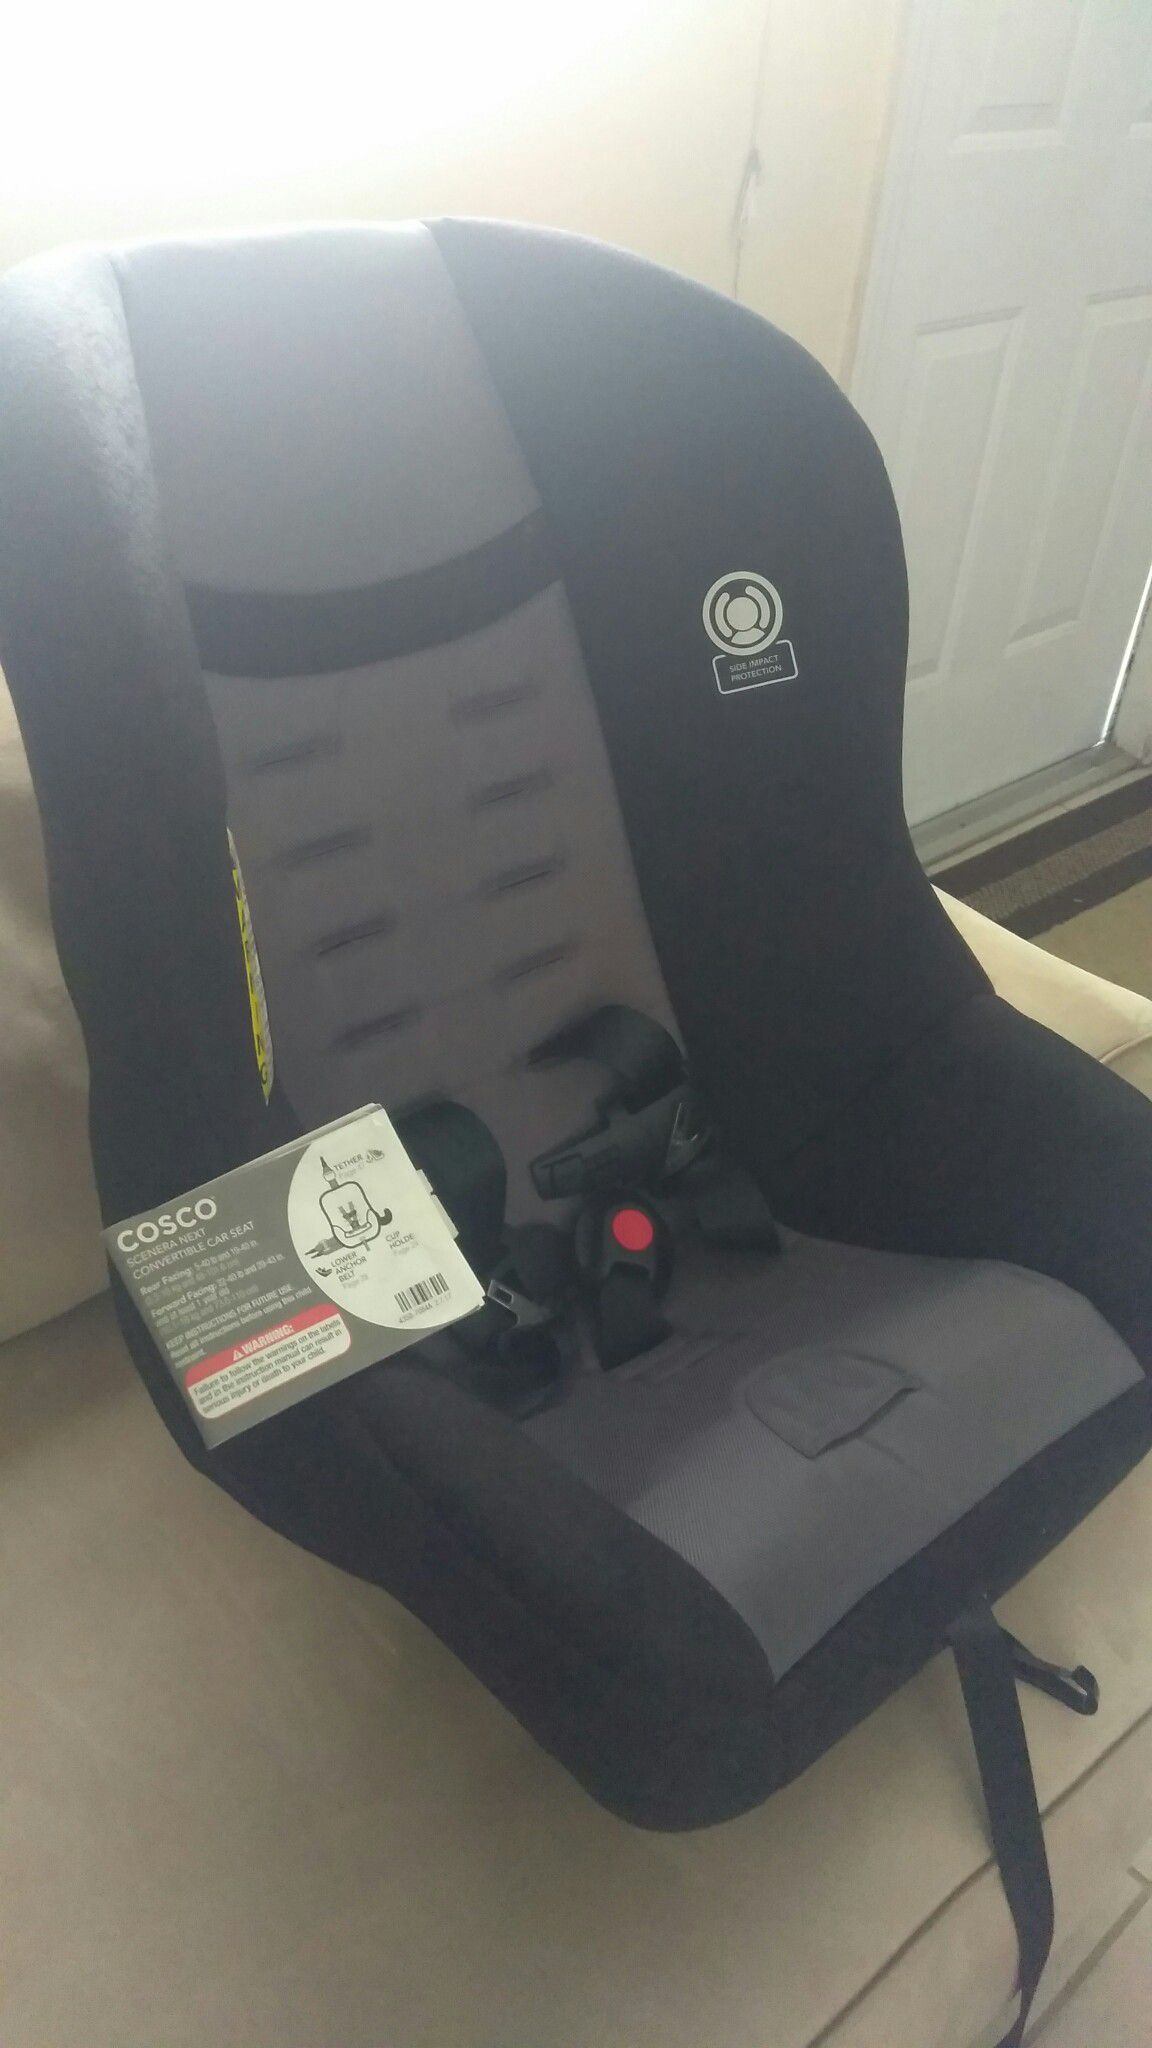 New baby car seat has never been used comes with instructions.